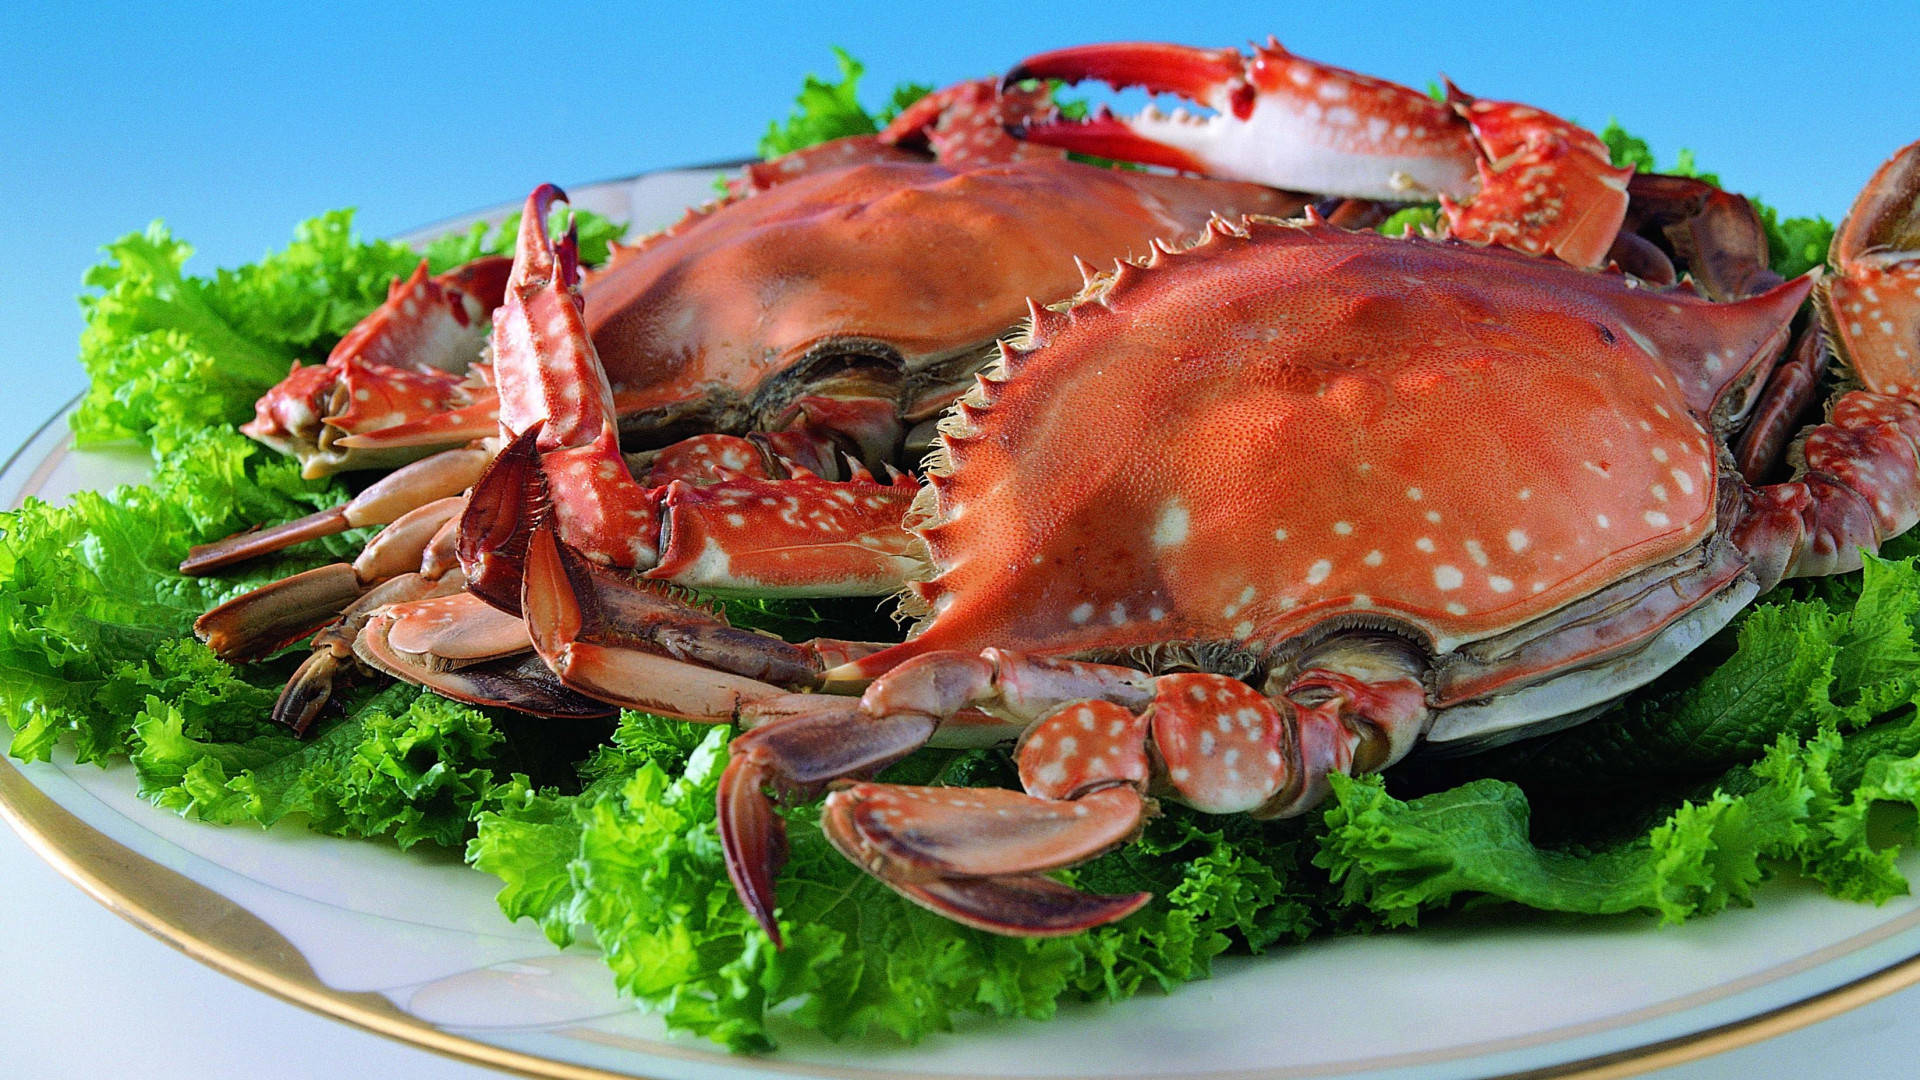 Crab And Lettuce On Plate Background